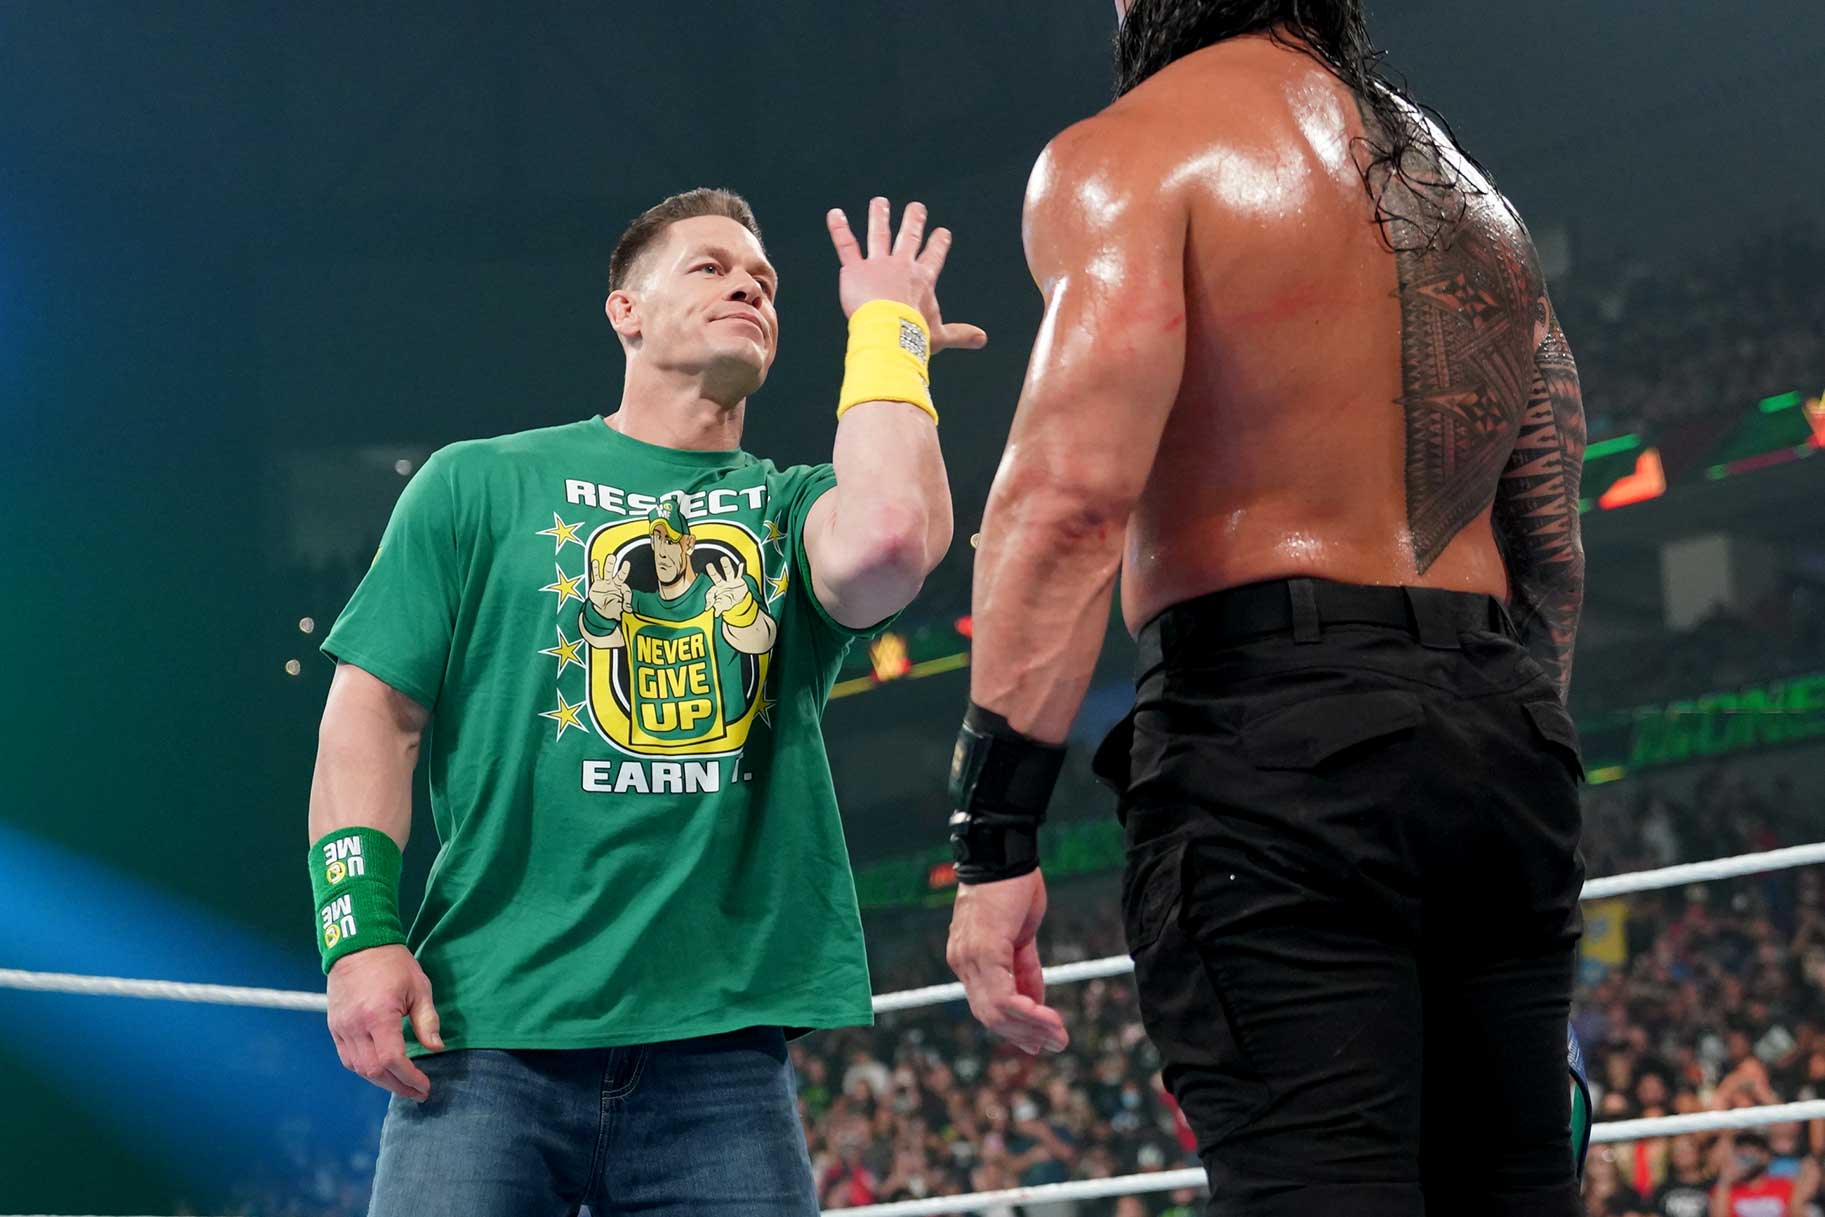 John Cena Doing His Cant See Me Hand Gesture